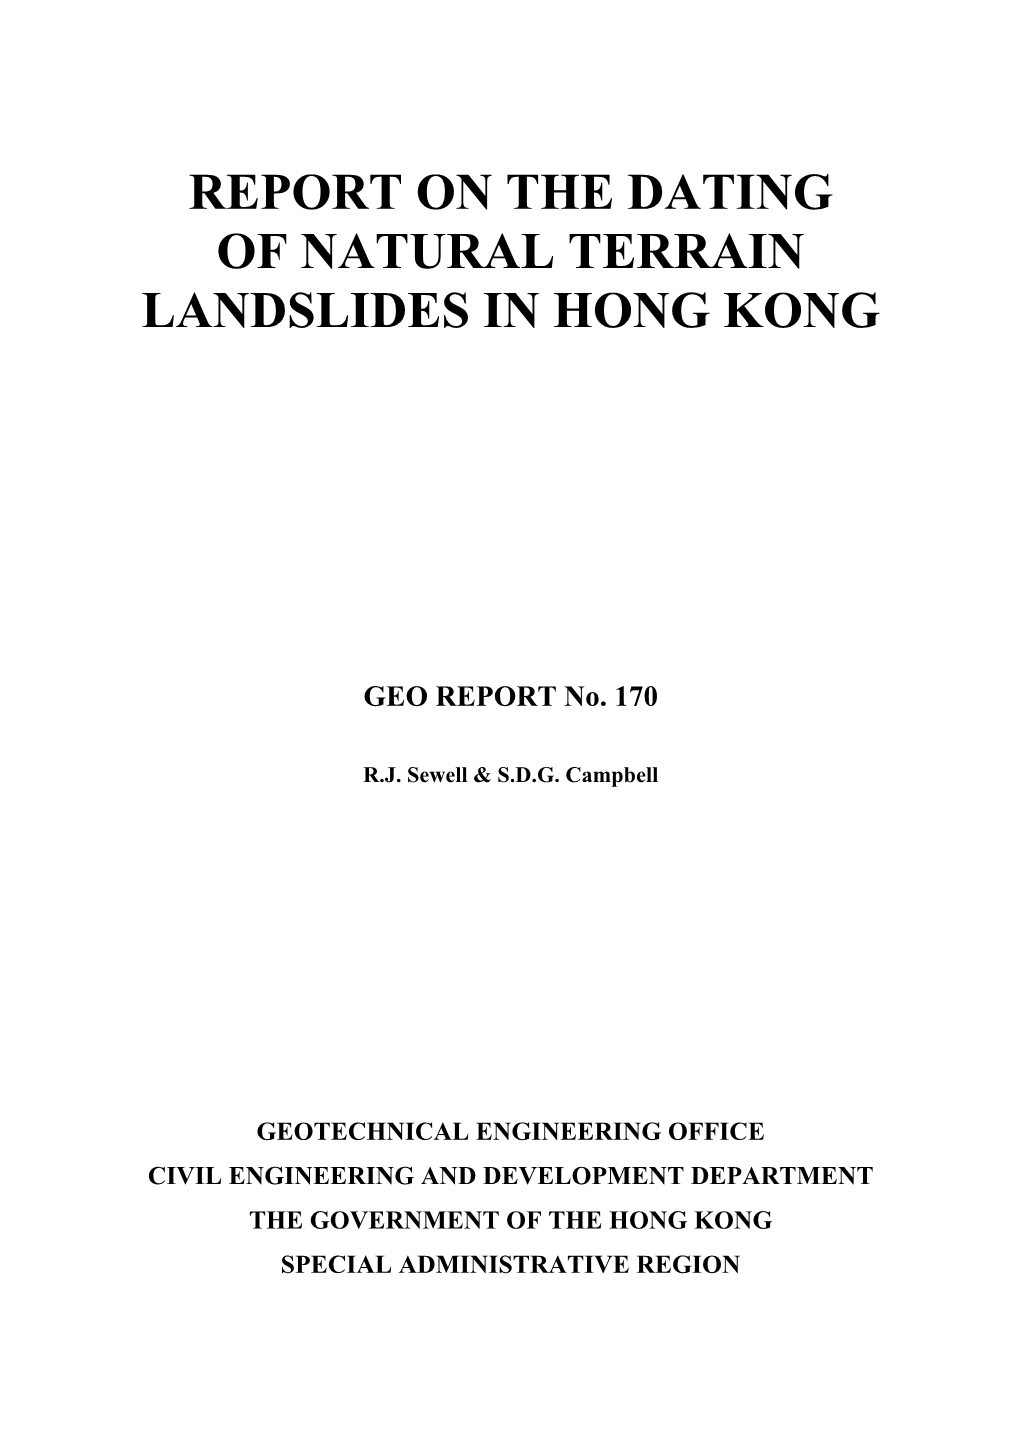 Report on the Dating of Natural Terrain Landslides in Hong Kong